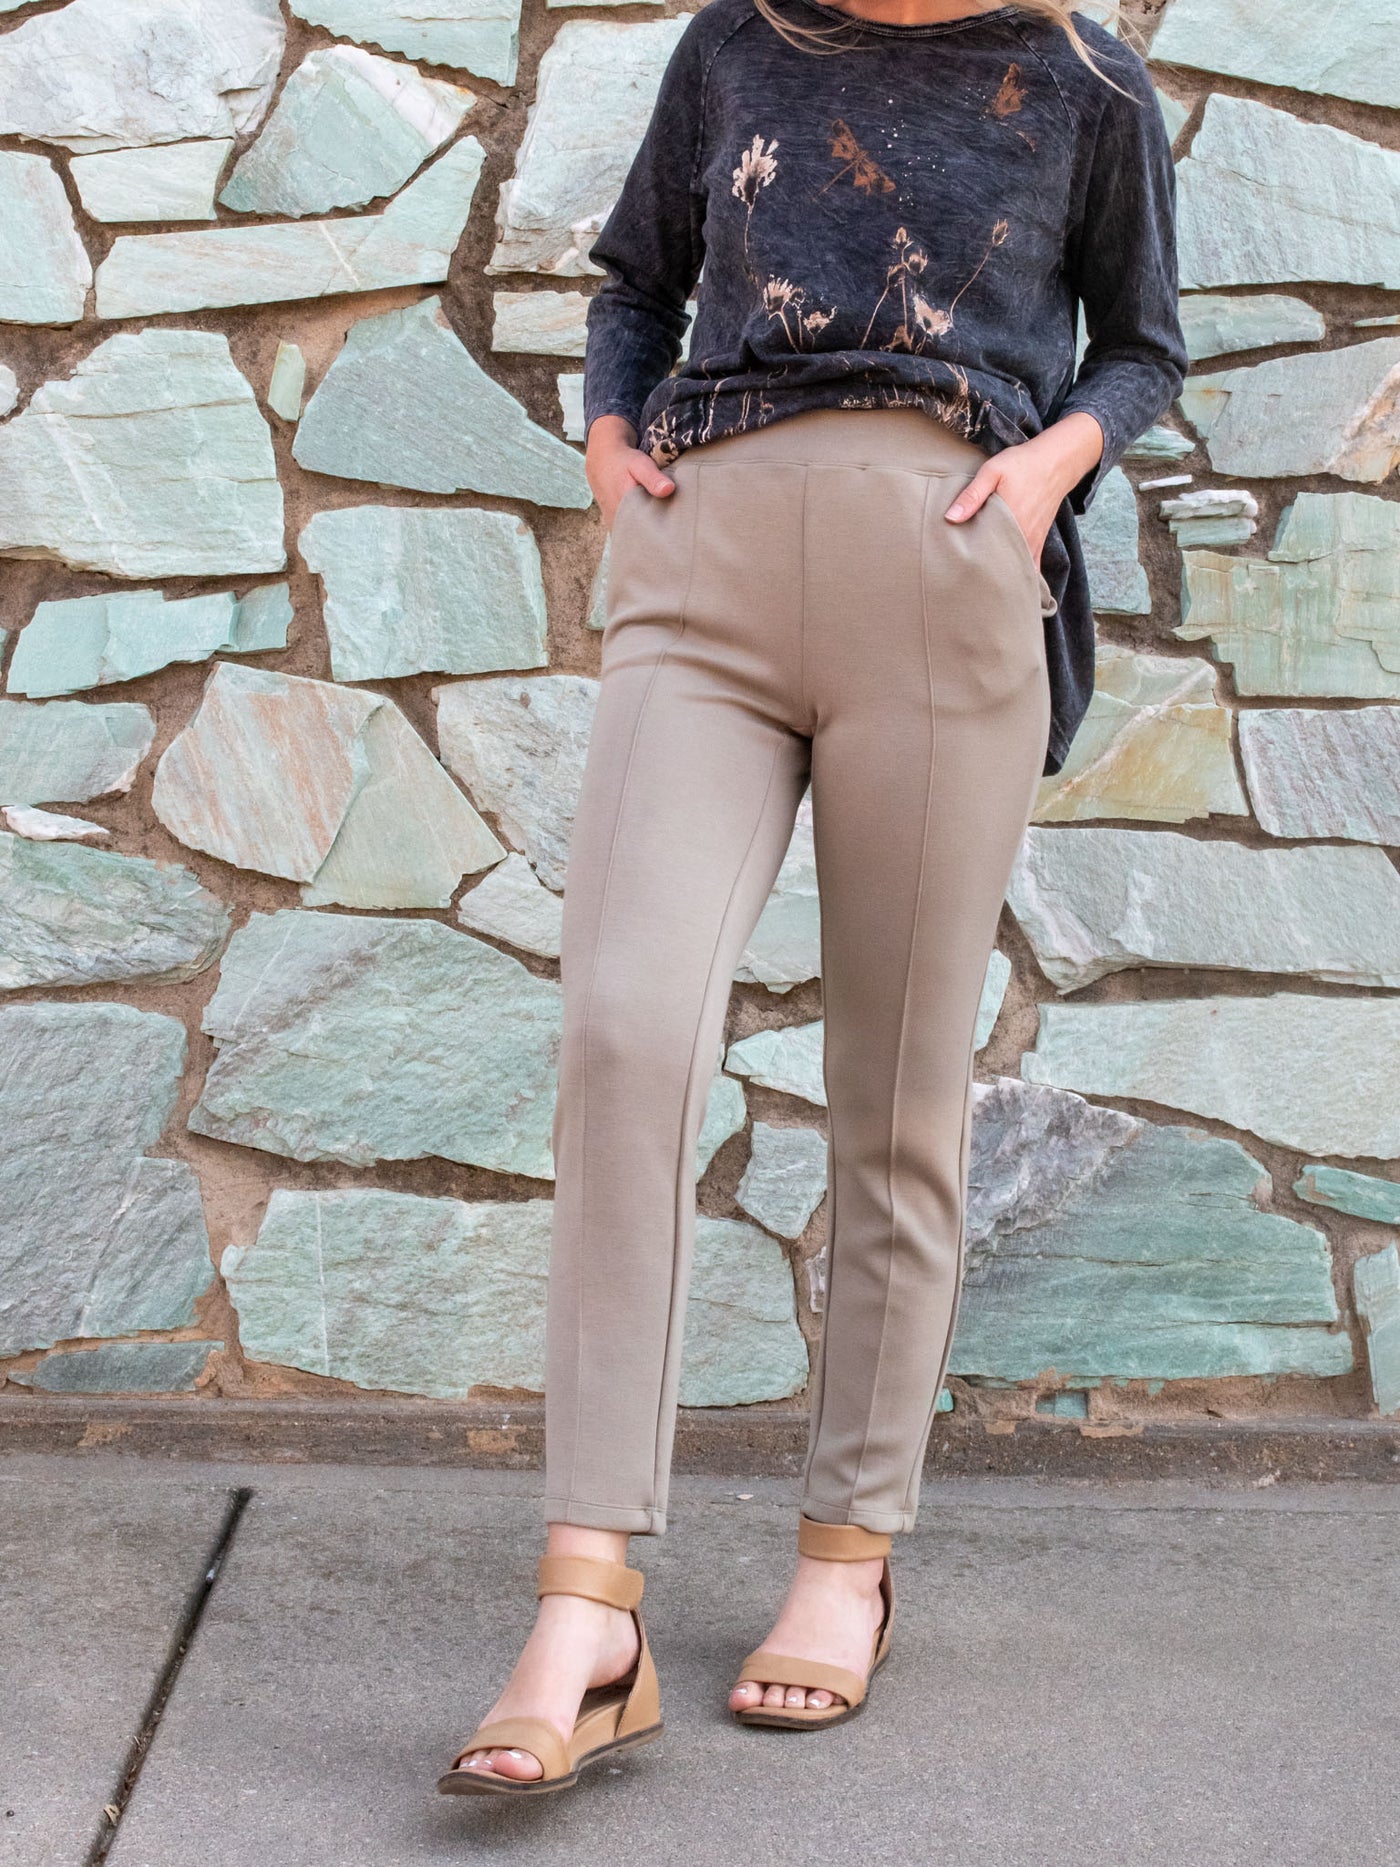 A model wearing a pair of tan scuba knit, ankle length pants. The model has it paired with a grey top and nude sandals.